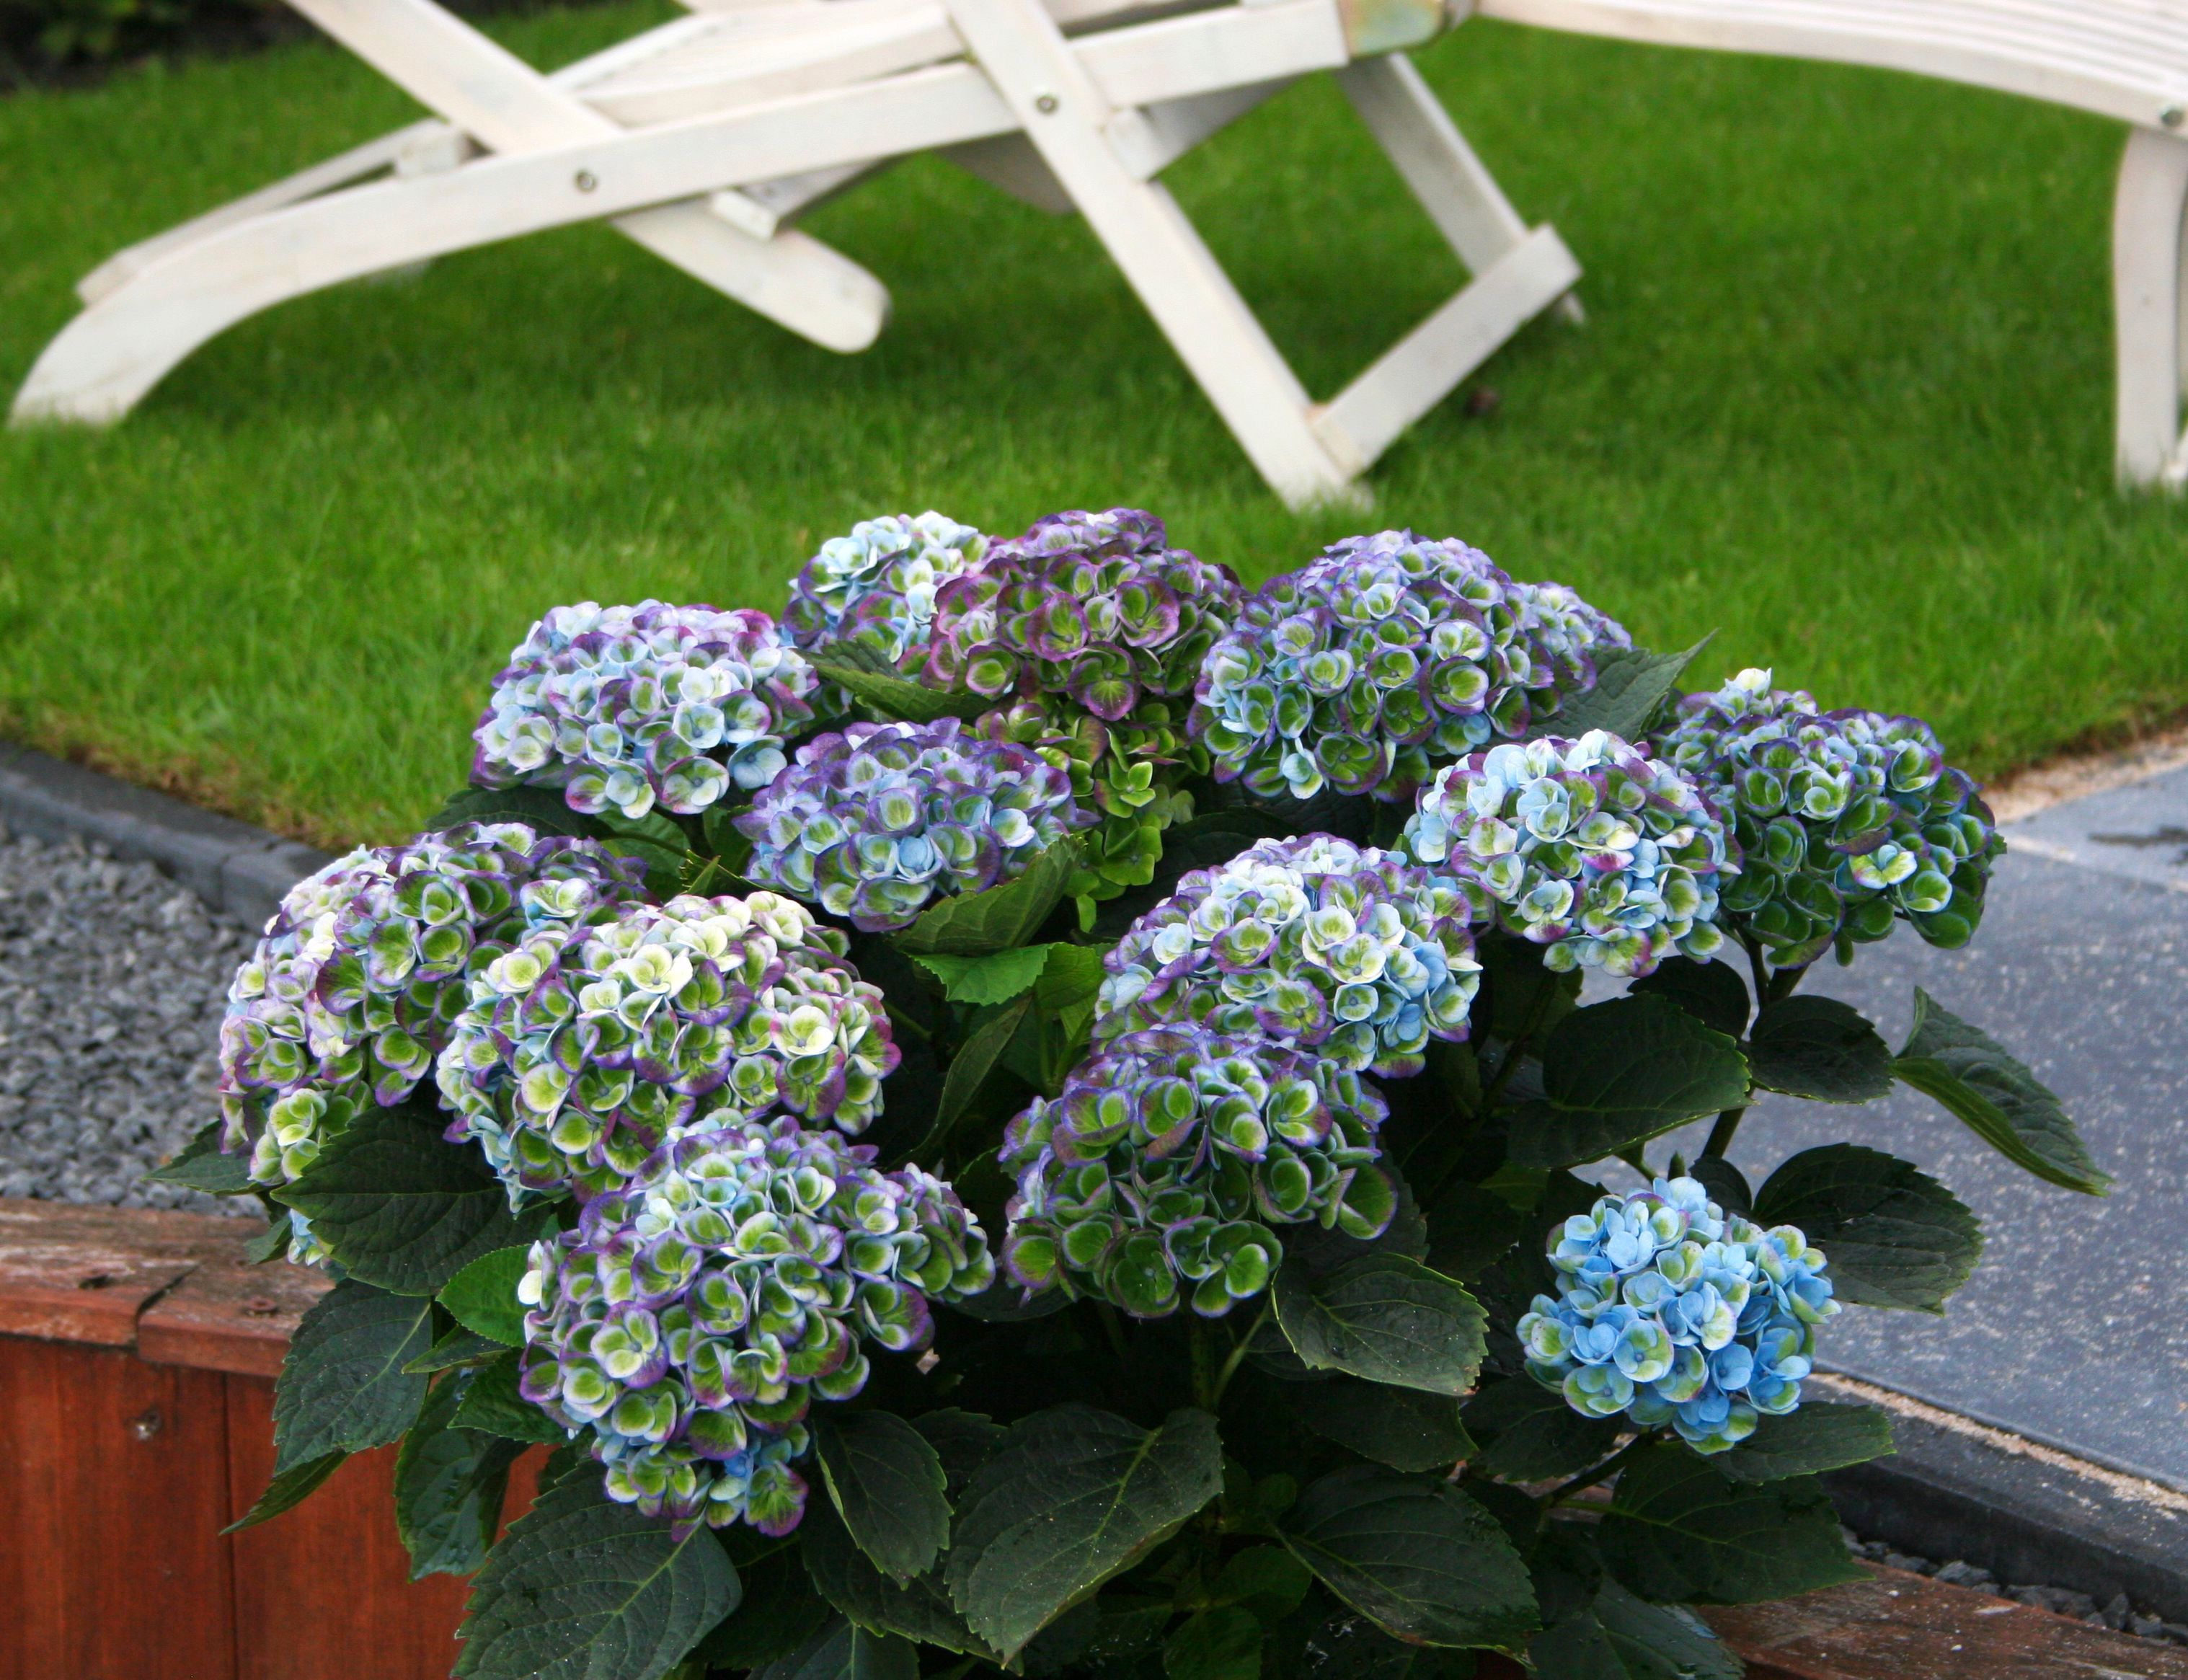 images/plants/hydrangea/hyd-magical-everlasting-revolution/hyd-magical-everlasting-revolution-0087.jpg